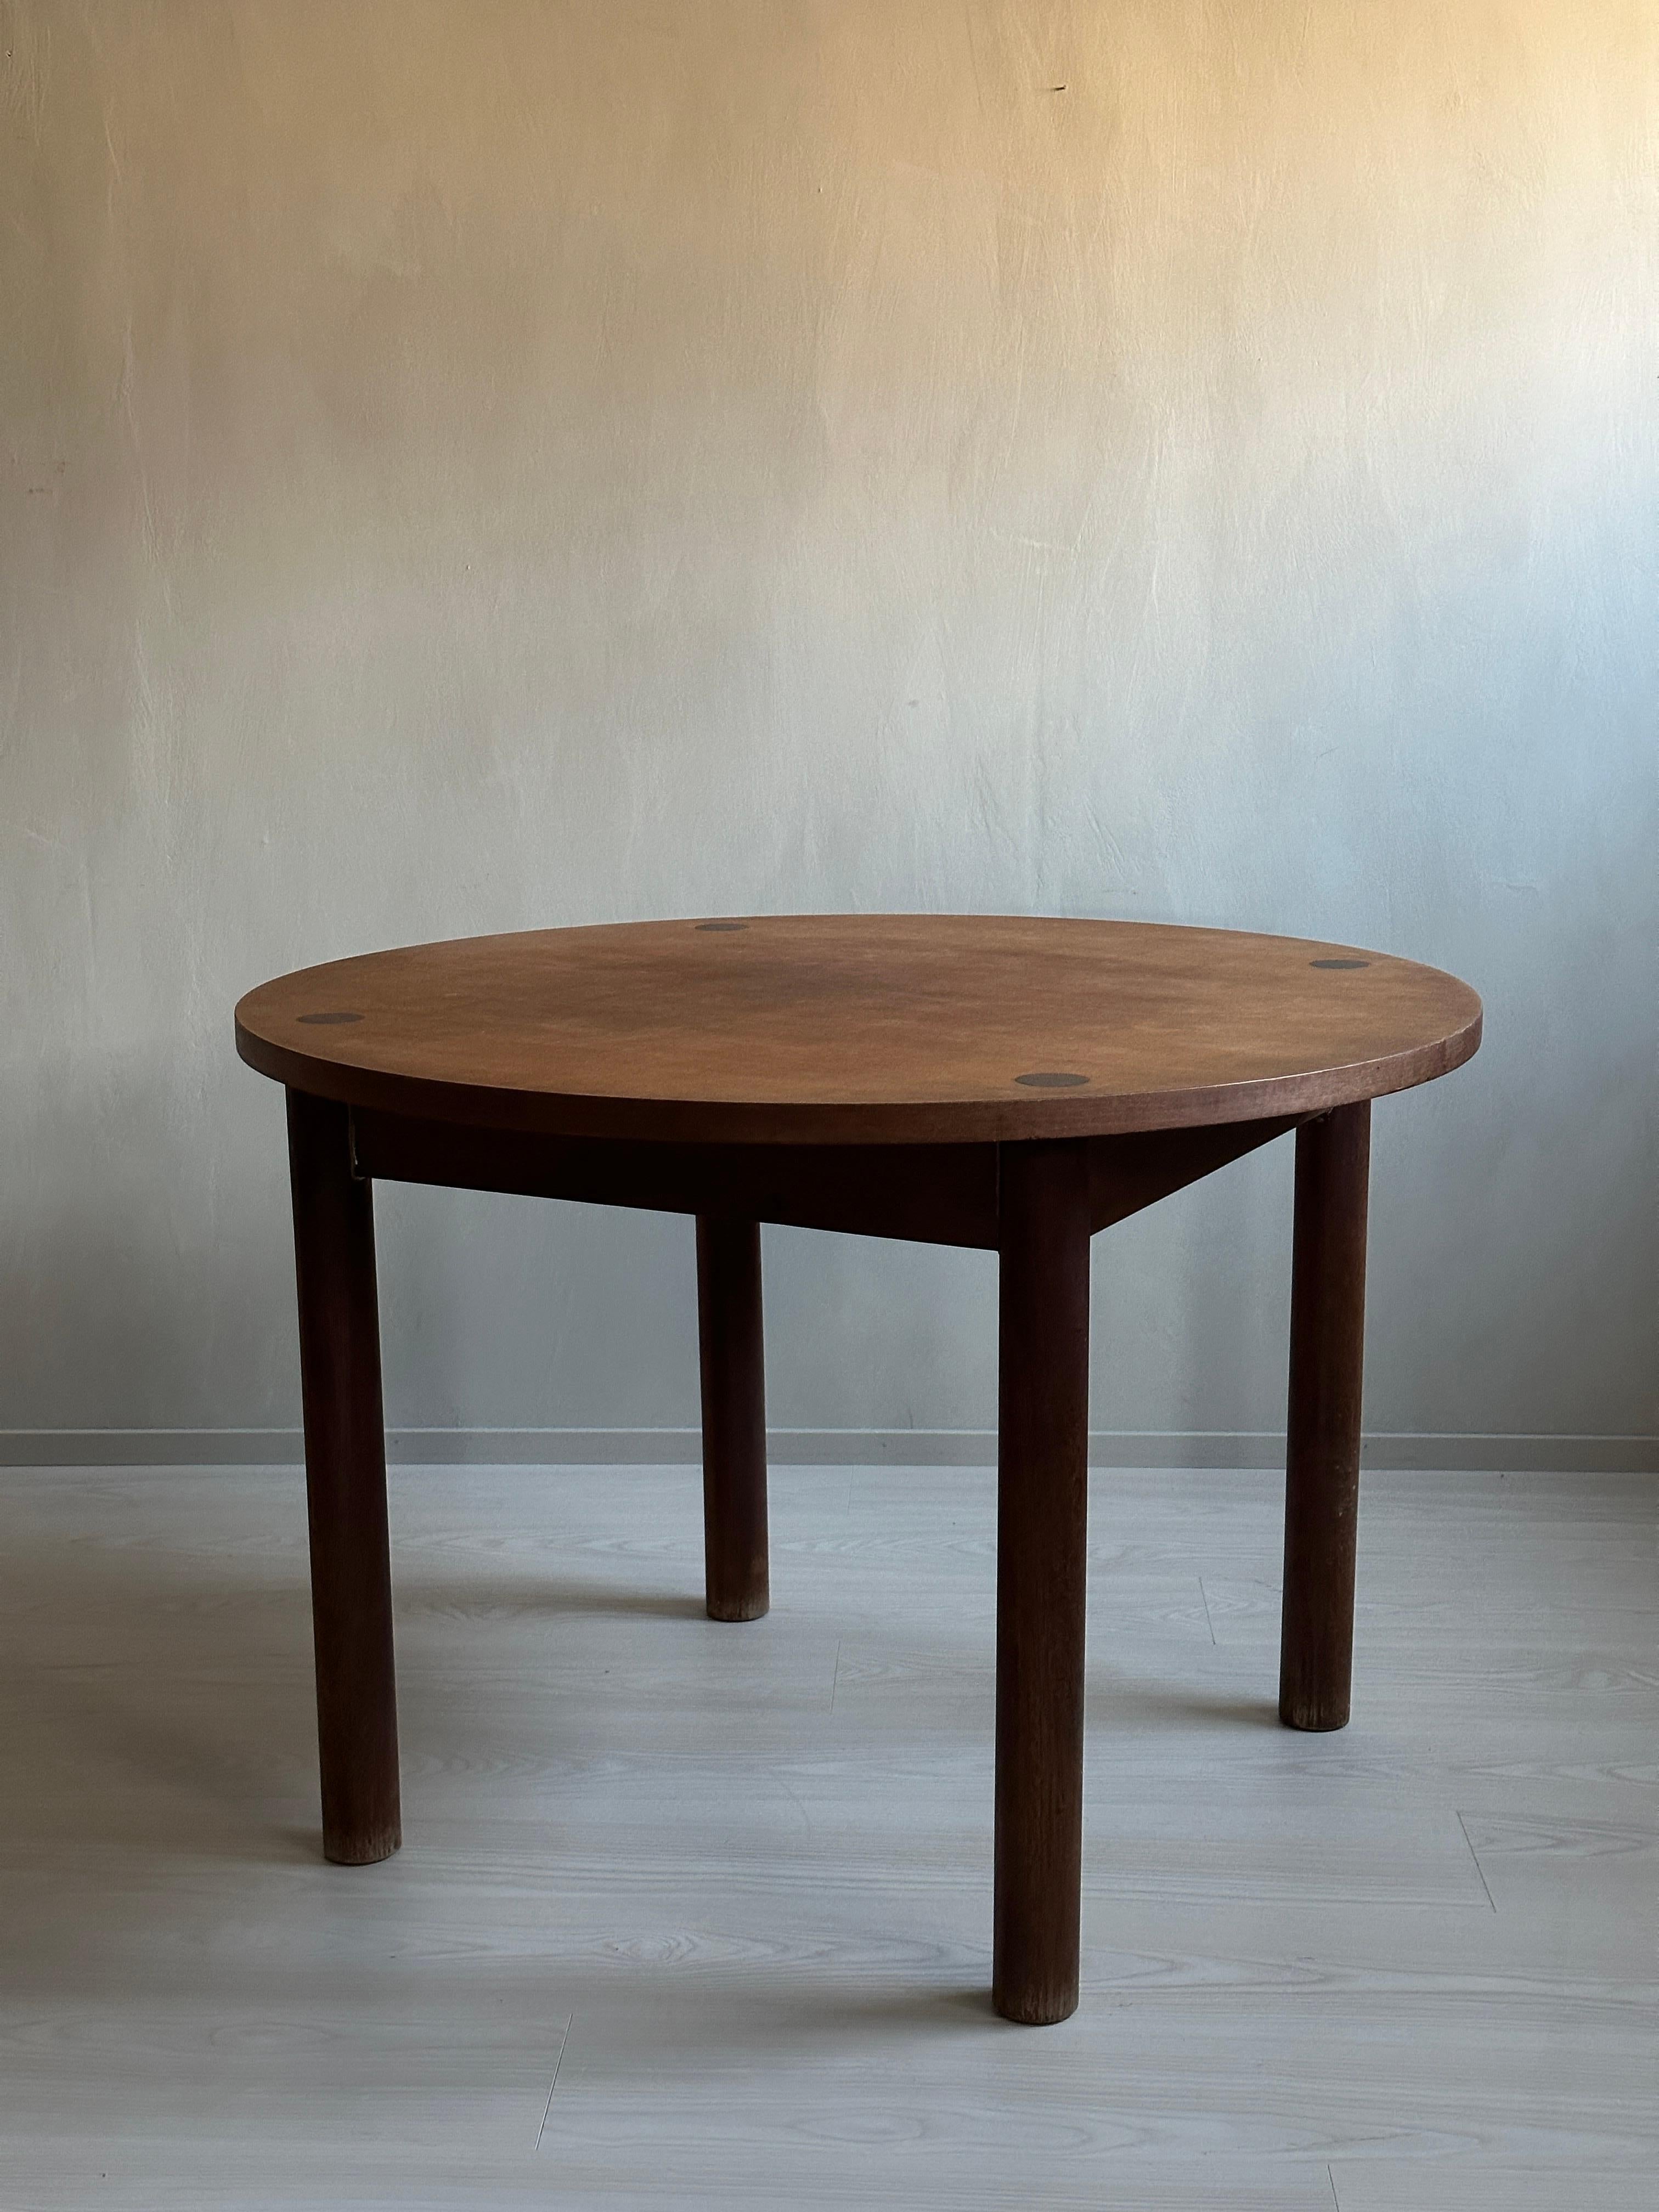 This beautiful round vintage dining table is a true masterpiece of design, inspired by the legendary French architect and designer, Charlotte Perriand. The table is made of dark stained oak, and it was originally crafted in France during the 1950s.